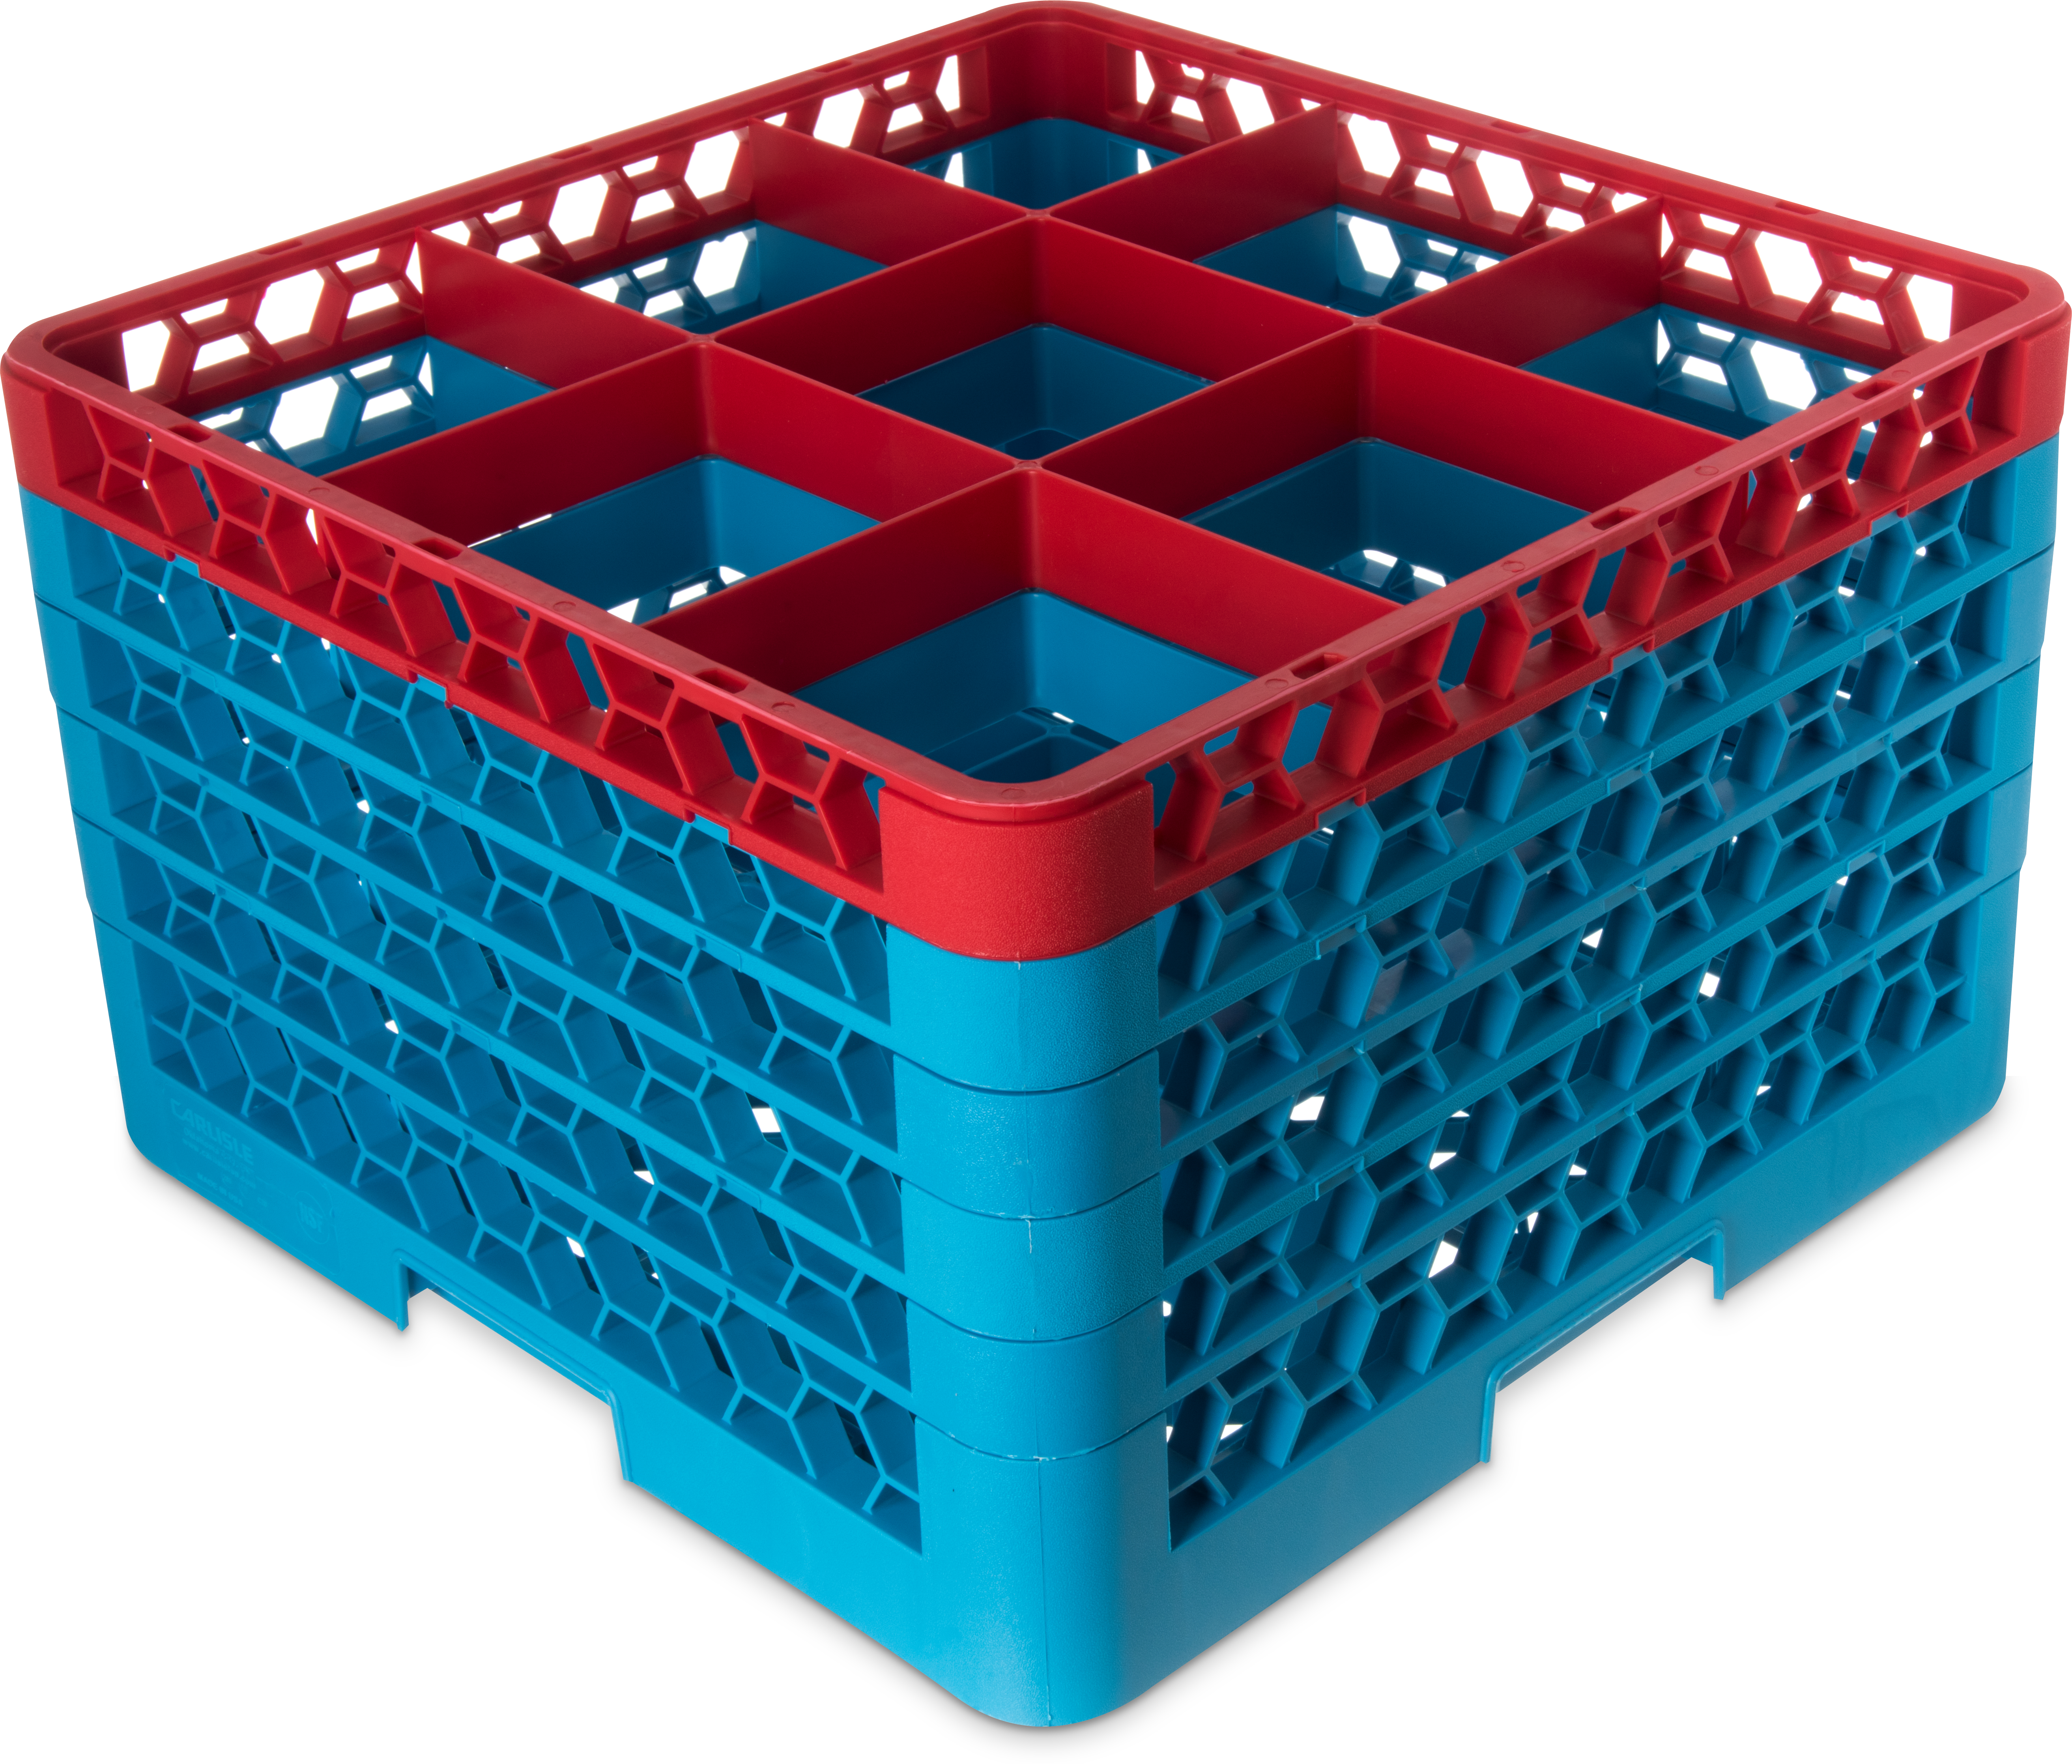 OptiClean 9 Compartment Glass Rack with 5 Extenders 11.9 - Red-Carlisle Blue